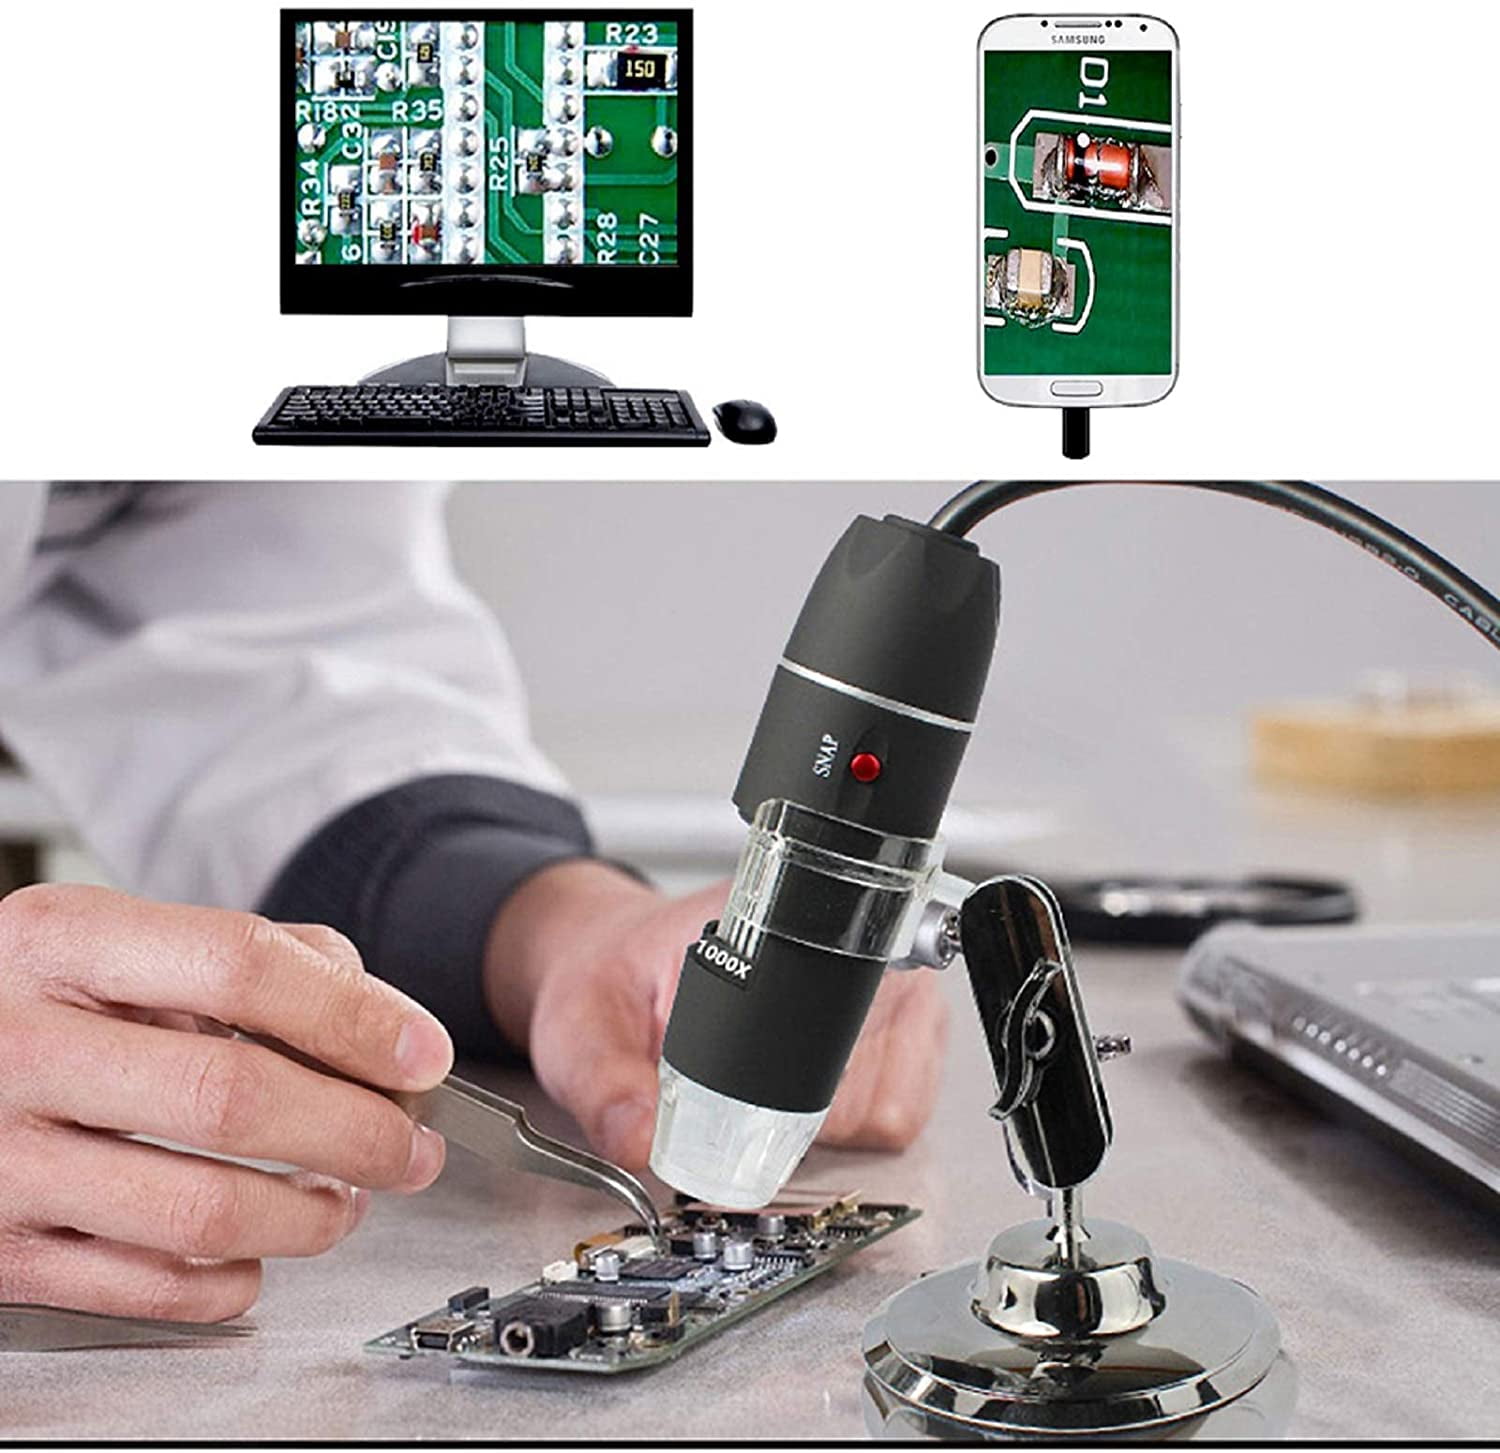 40-1000x USB Digital Microscope Camera-Handheld Magnification Endoscope with OTG Adapter and Metal Stand-for Studying,Scientific Research Exchange and Sharing 